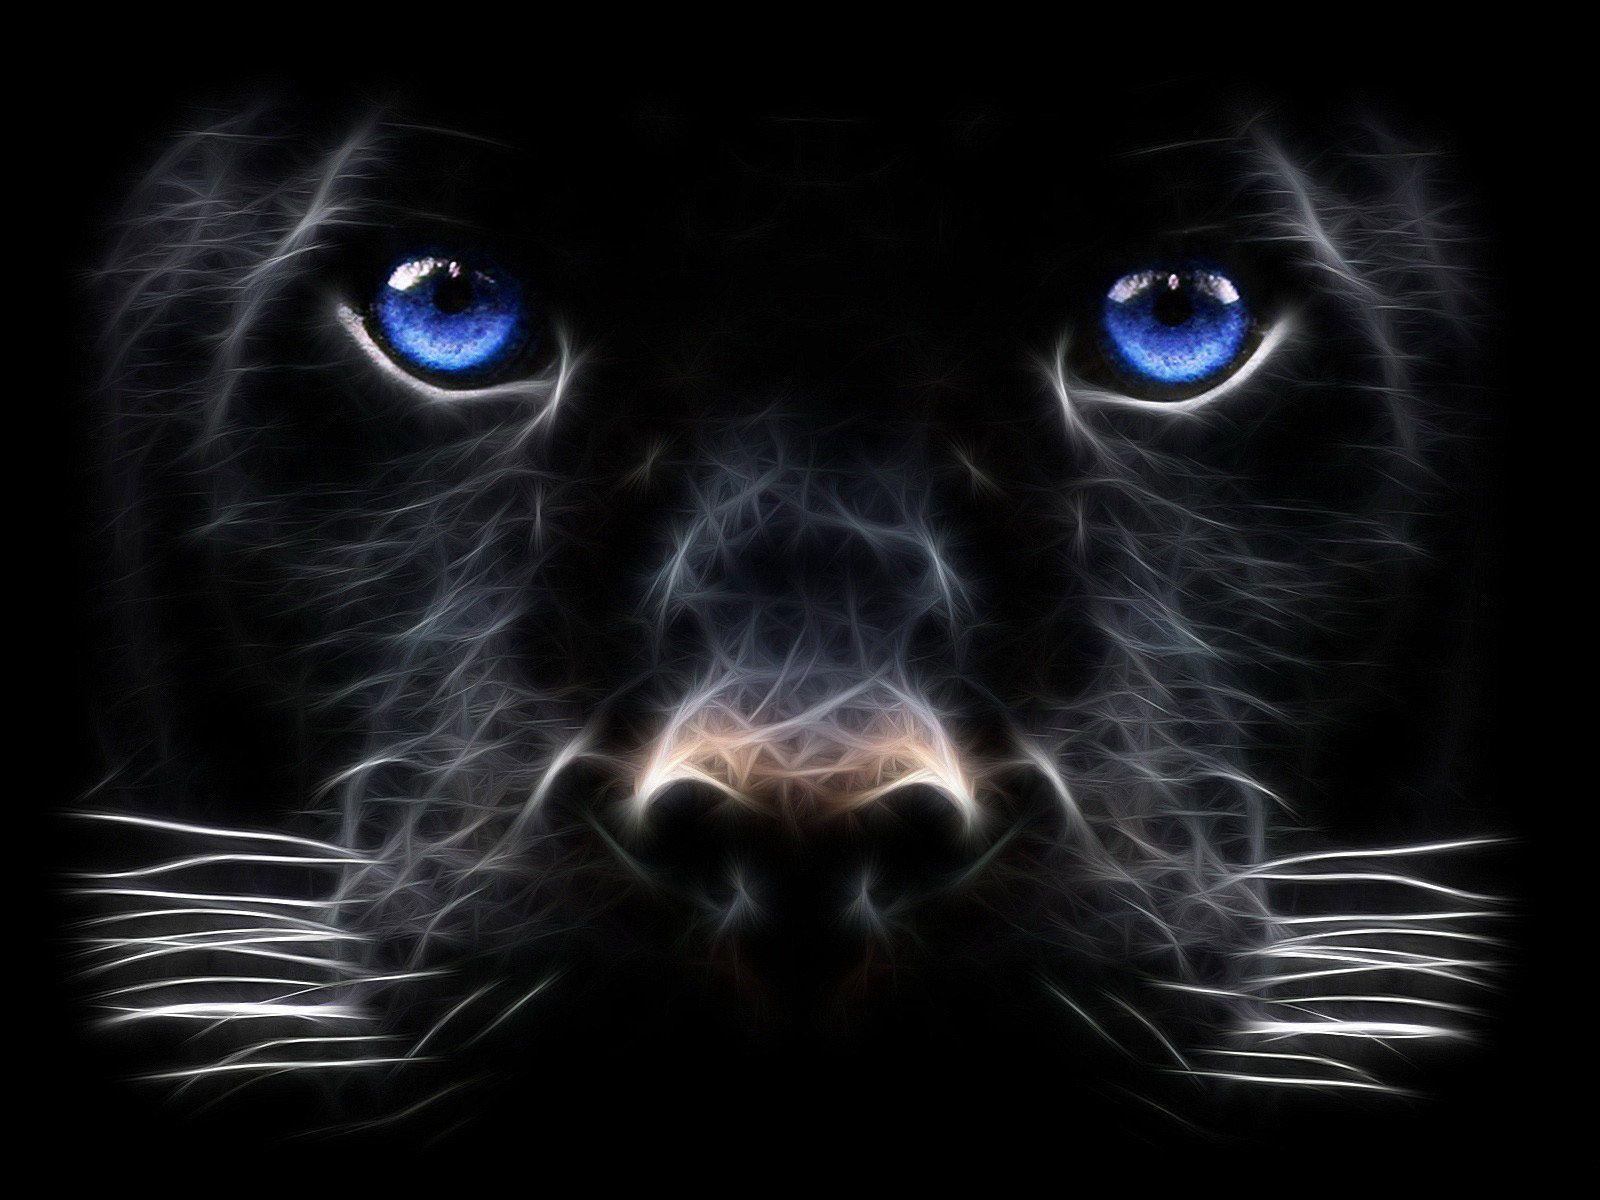 My Top Collection: Big cat wallpapers